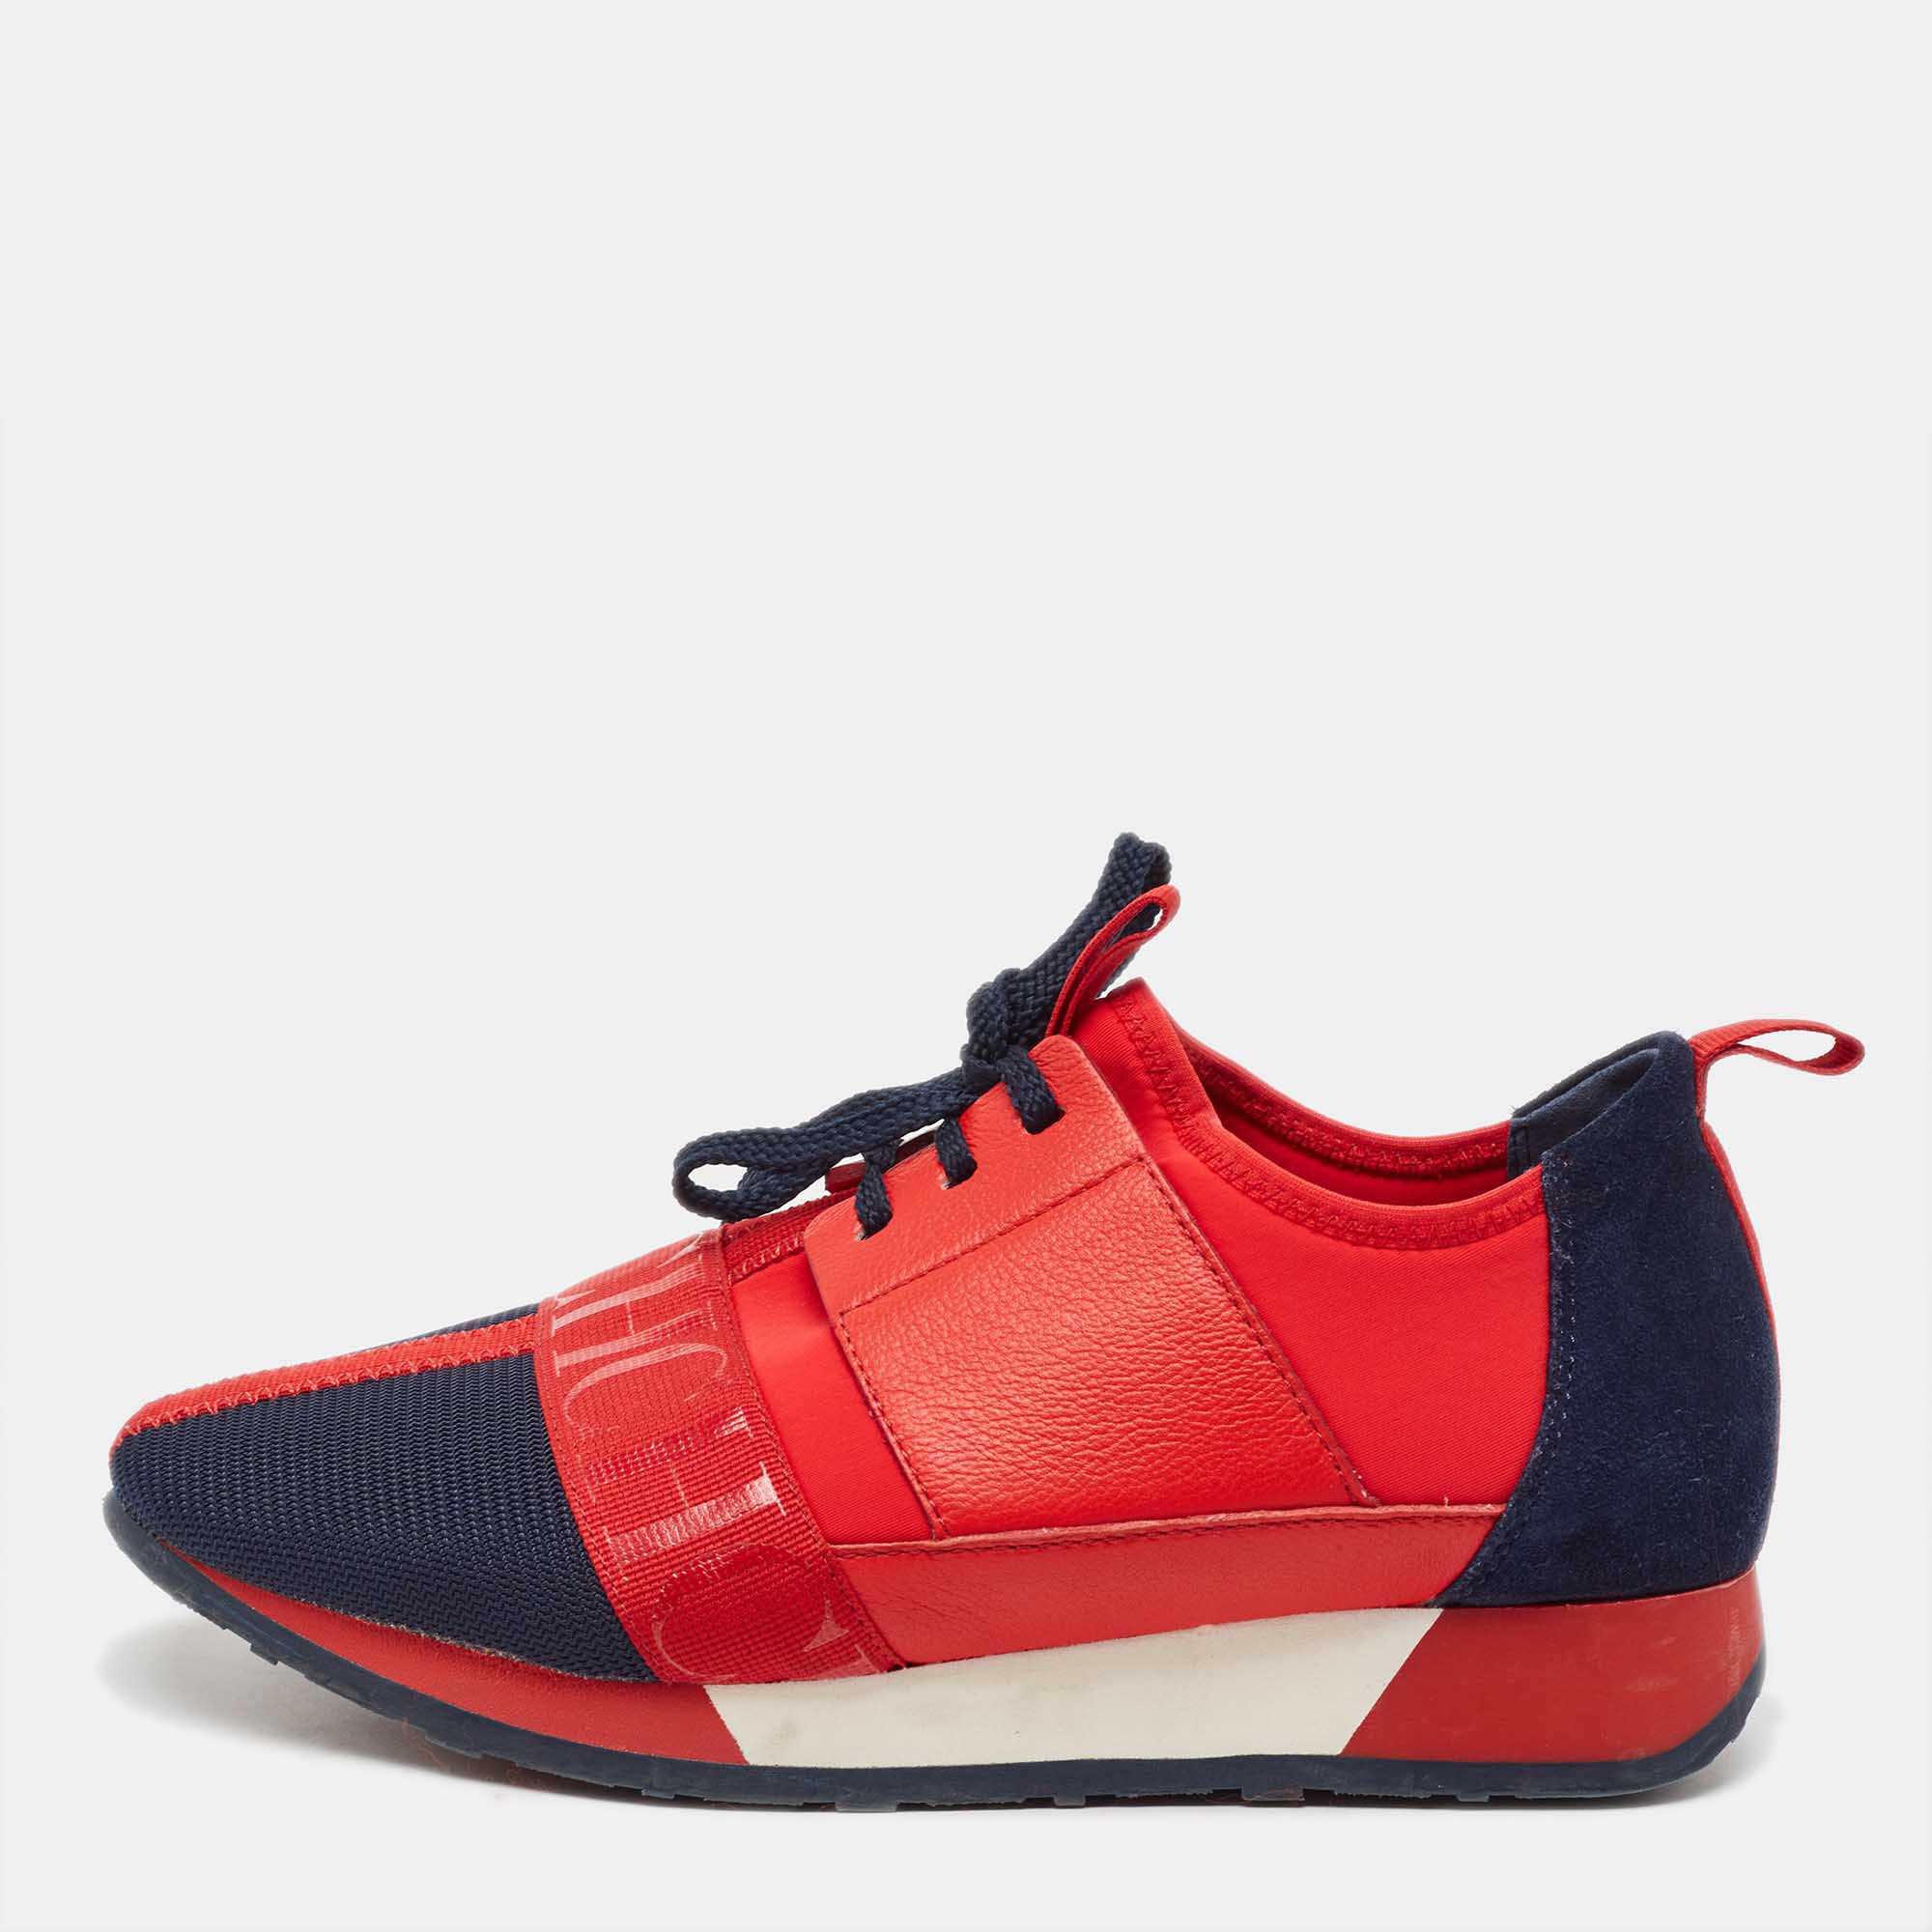 Coming in a classic silhouette these CH Carolina Herrera sneakers are a seamless combination of luxury comfort and style. These sneakers are designed with signature details and comfortable insoles.